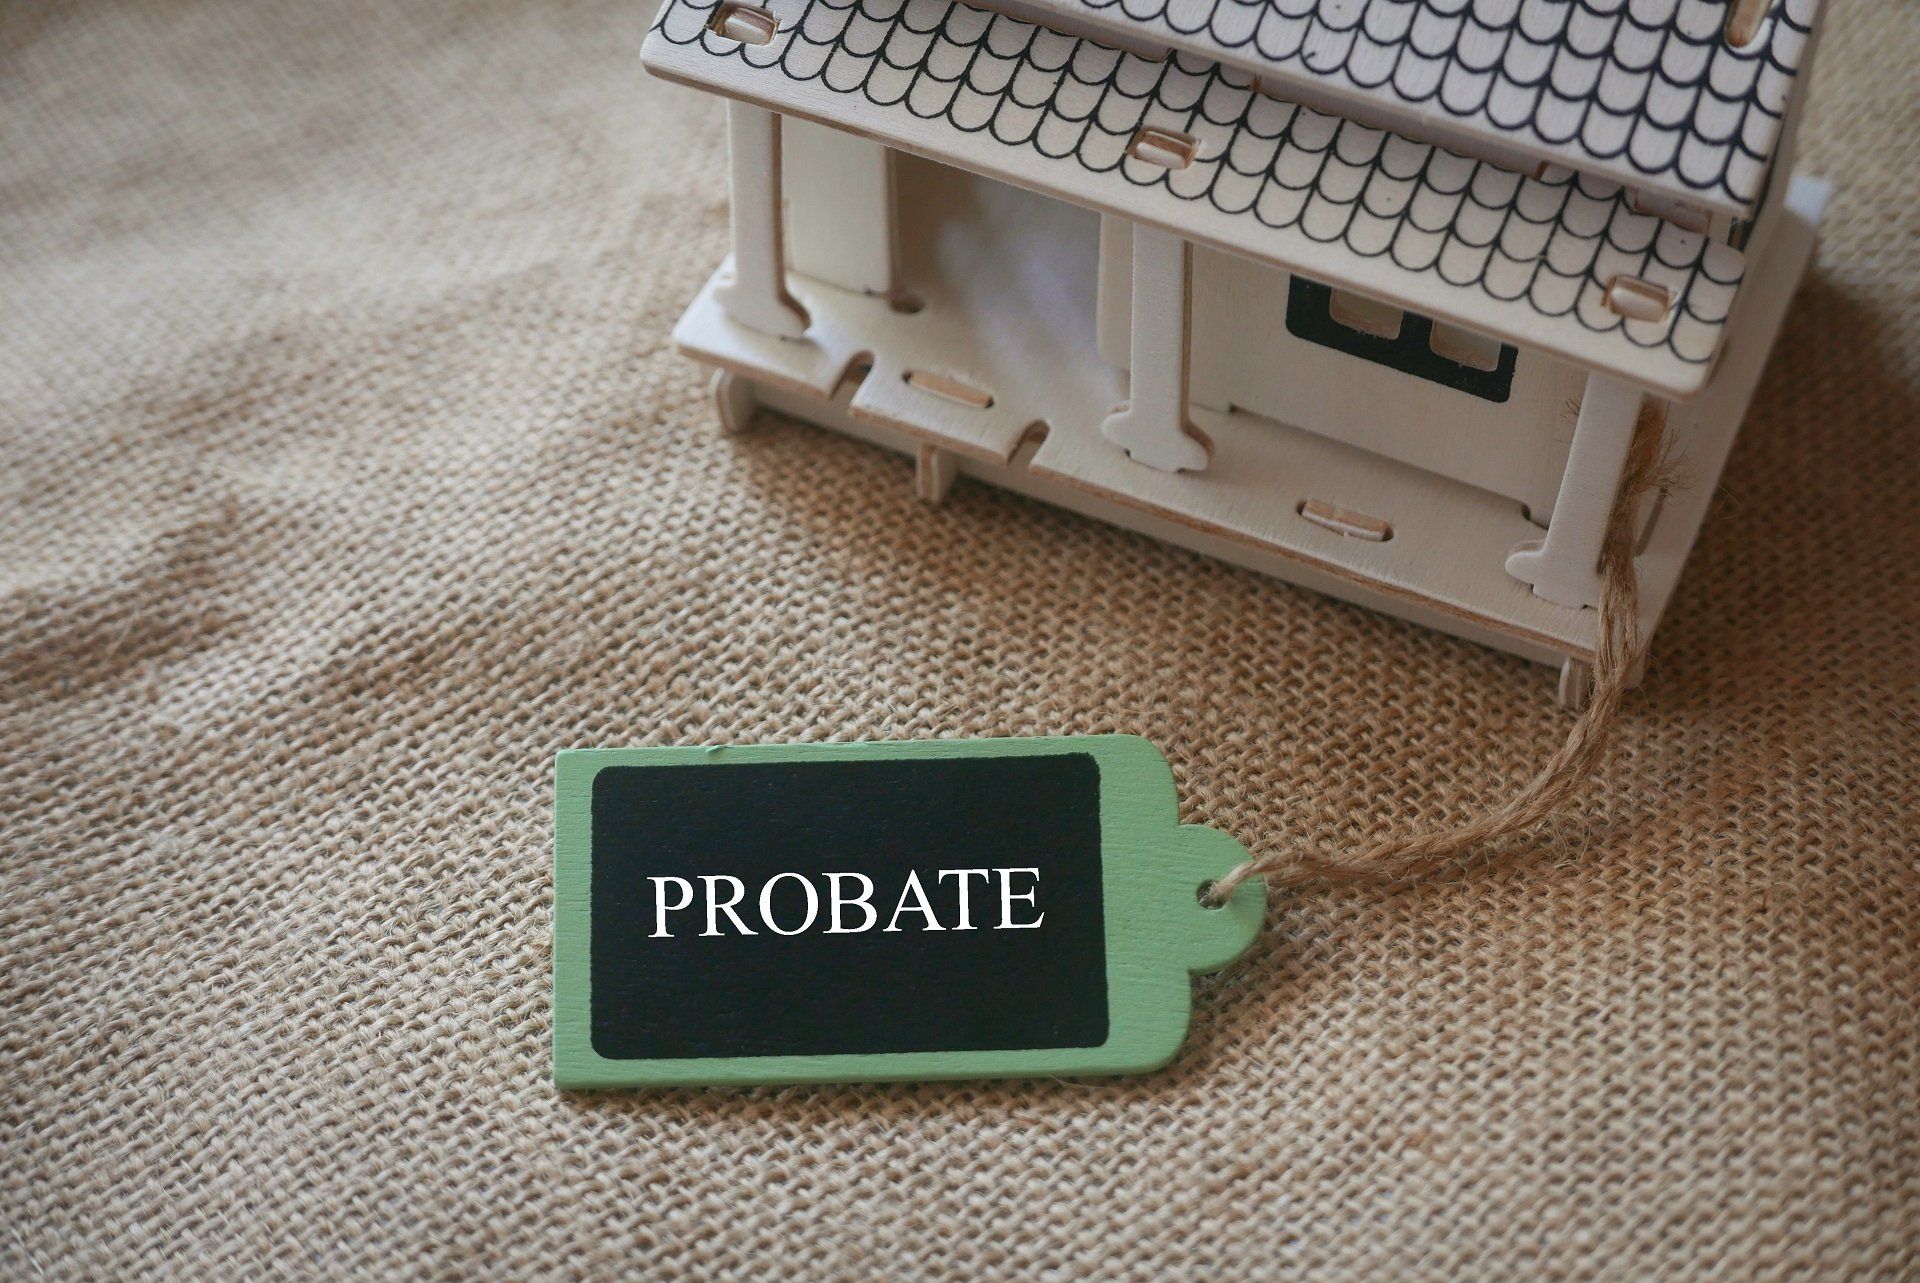 How Much Does Florida Probate Cost?